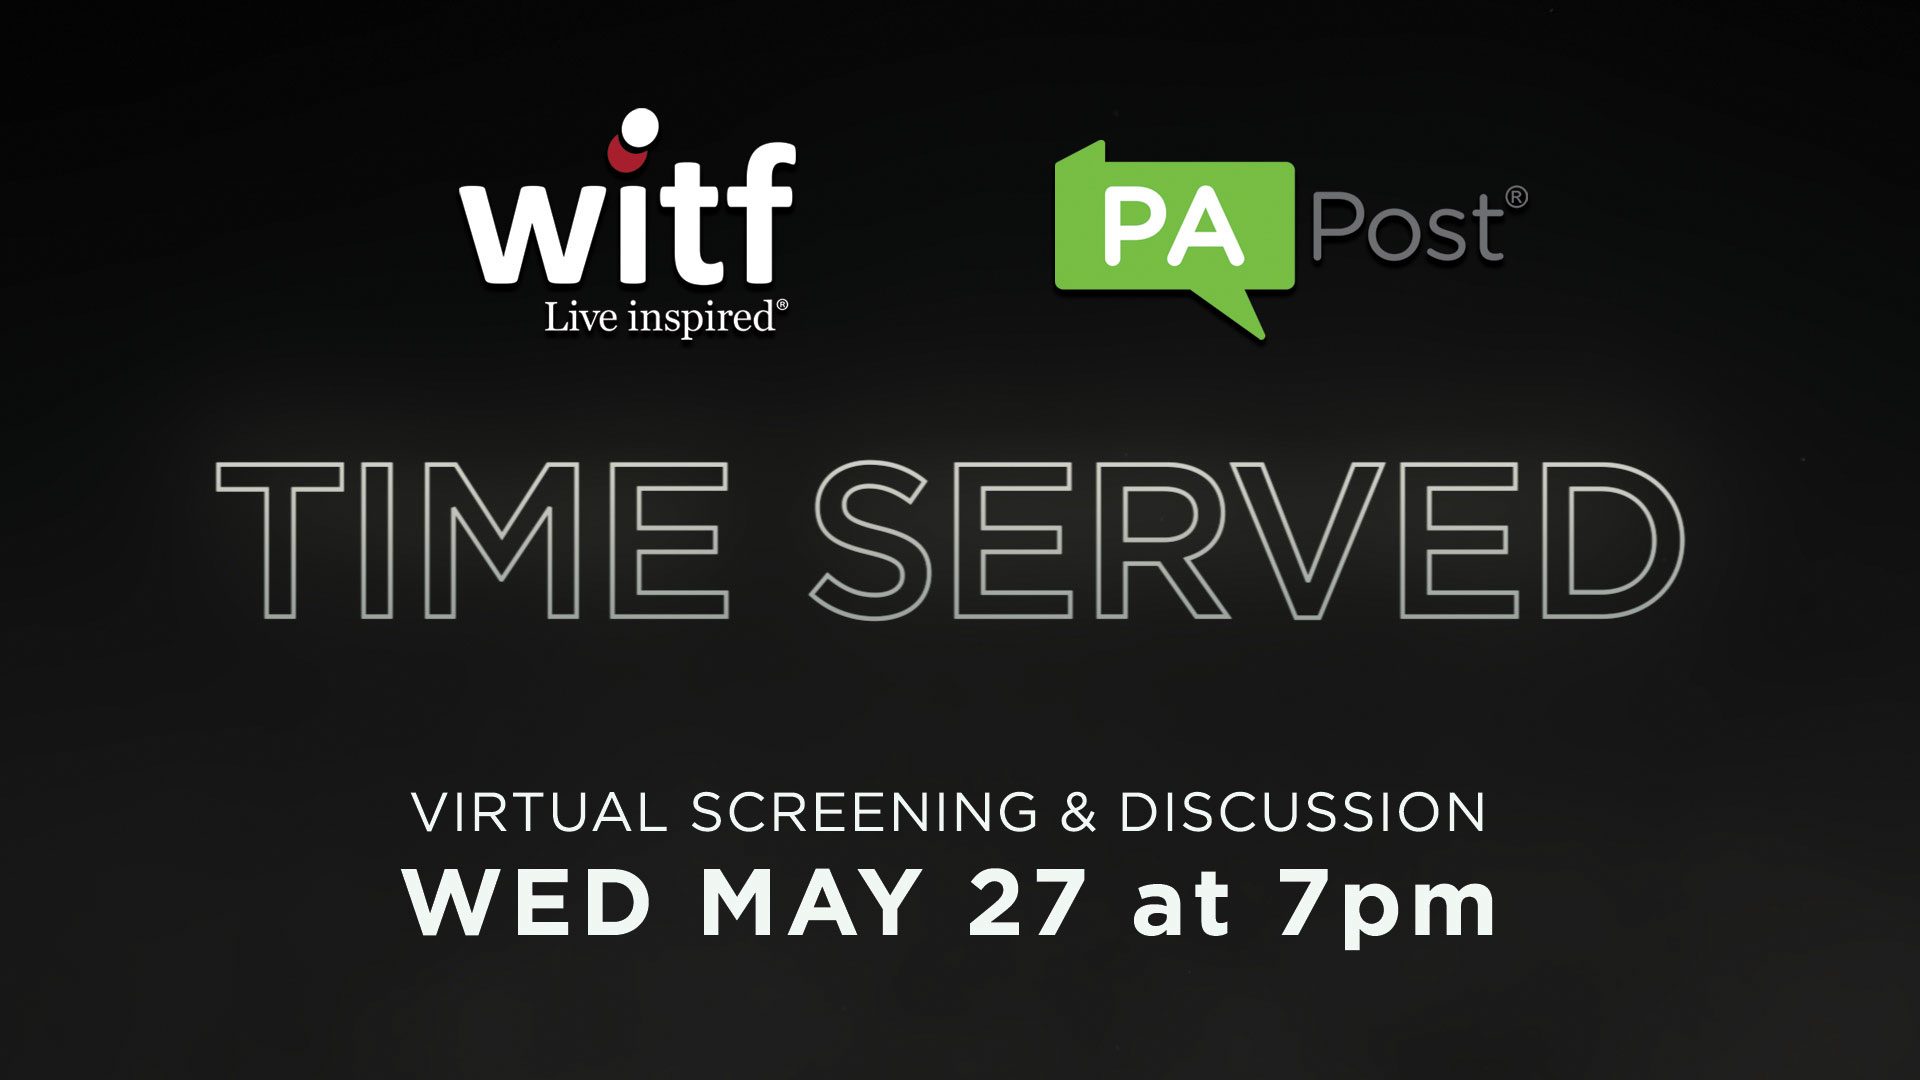 TIME SERVED | Virtual Screening & Discussion Wednesday, May 27 at 7pm